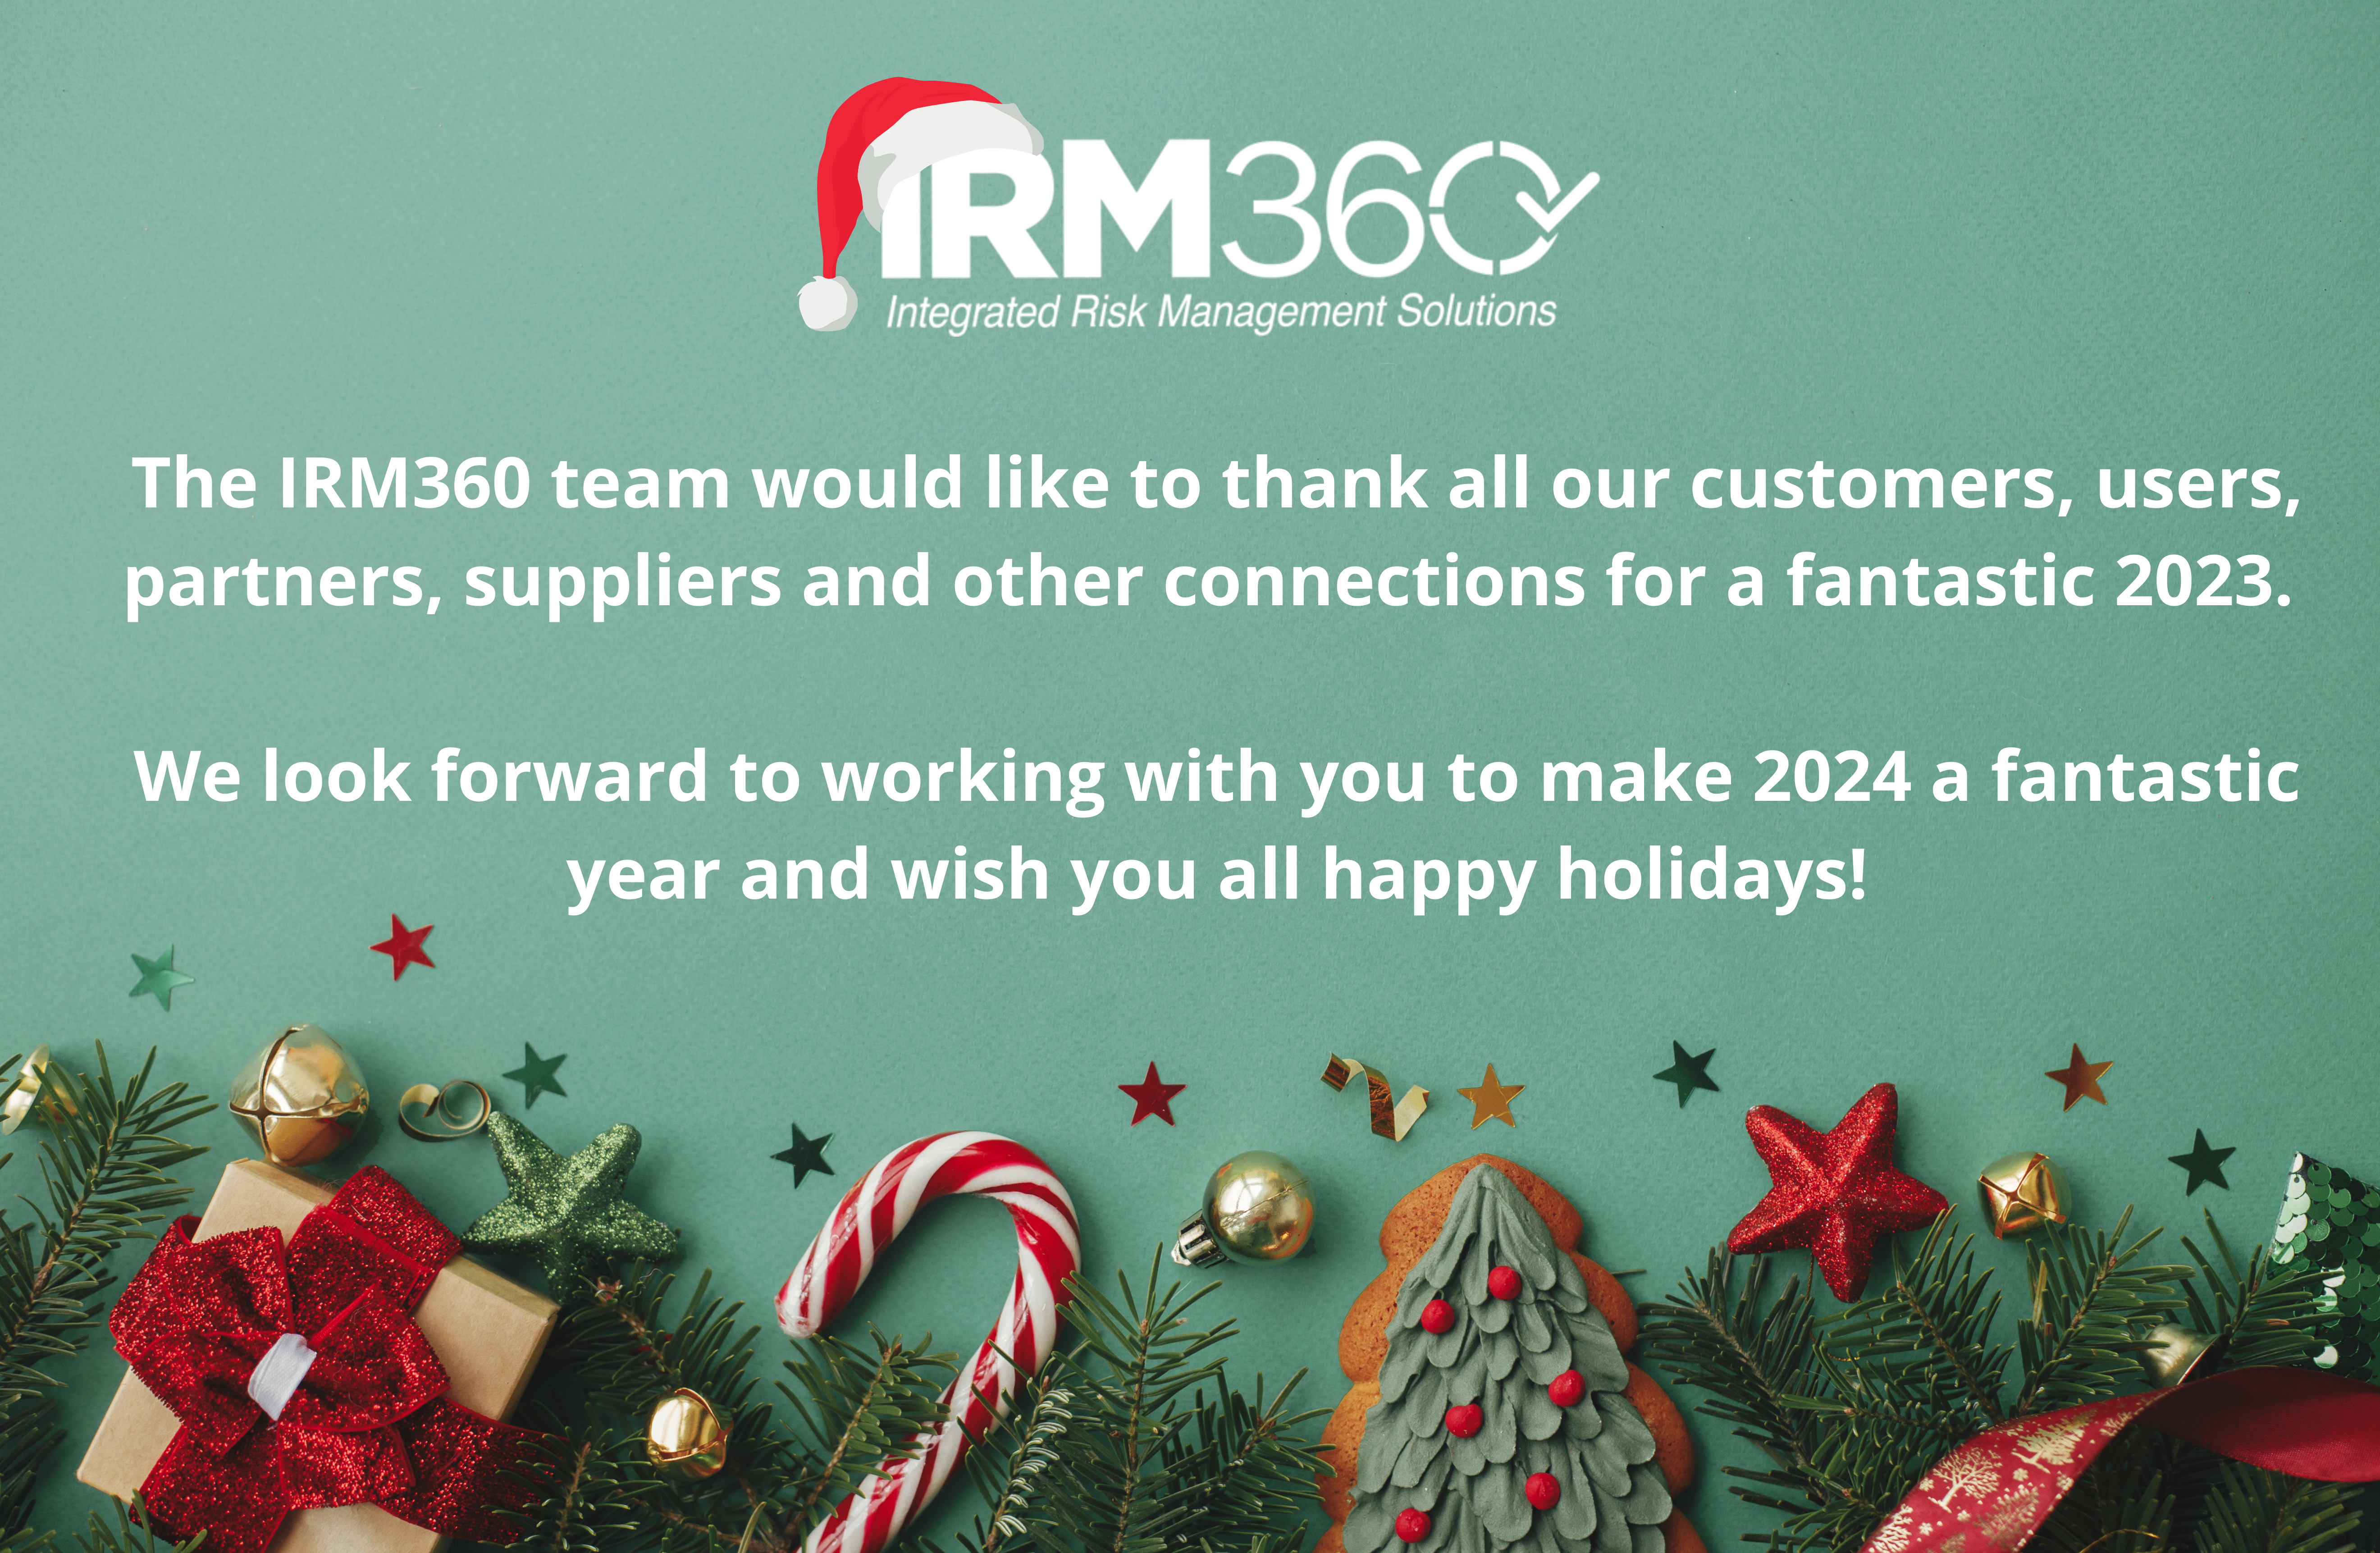 IRM360 wishes everyone a Merry Christmas and a Happy New Year!